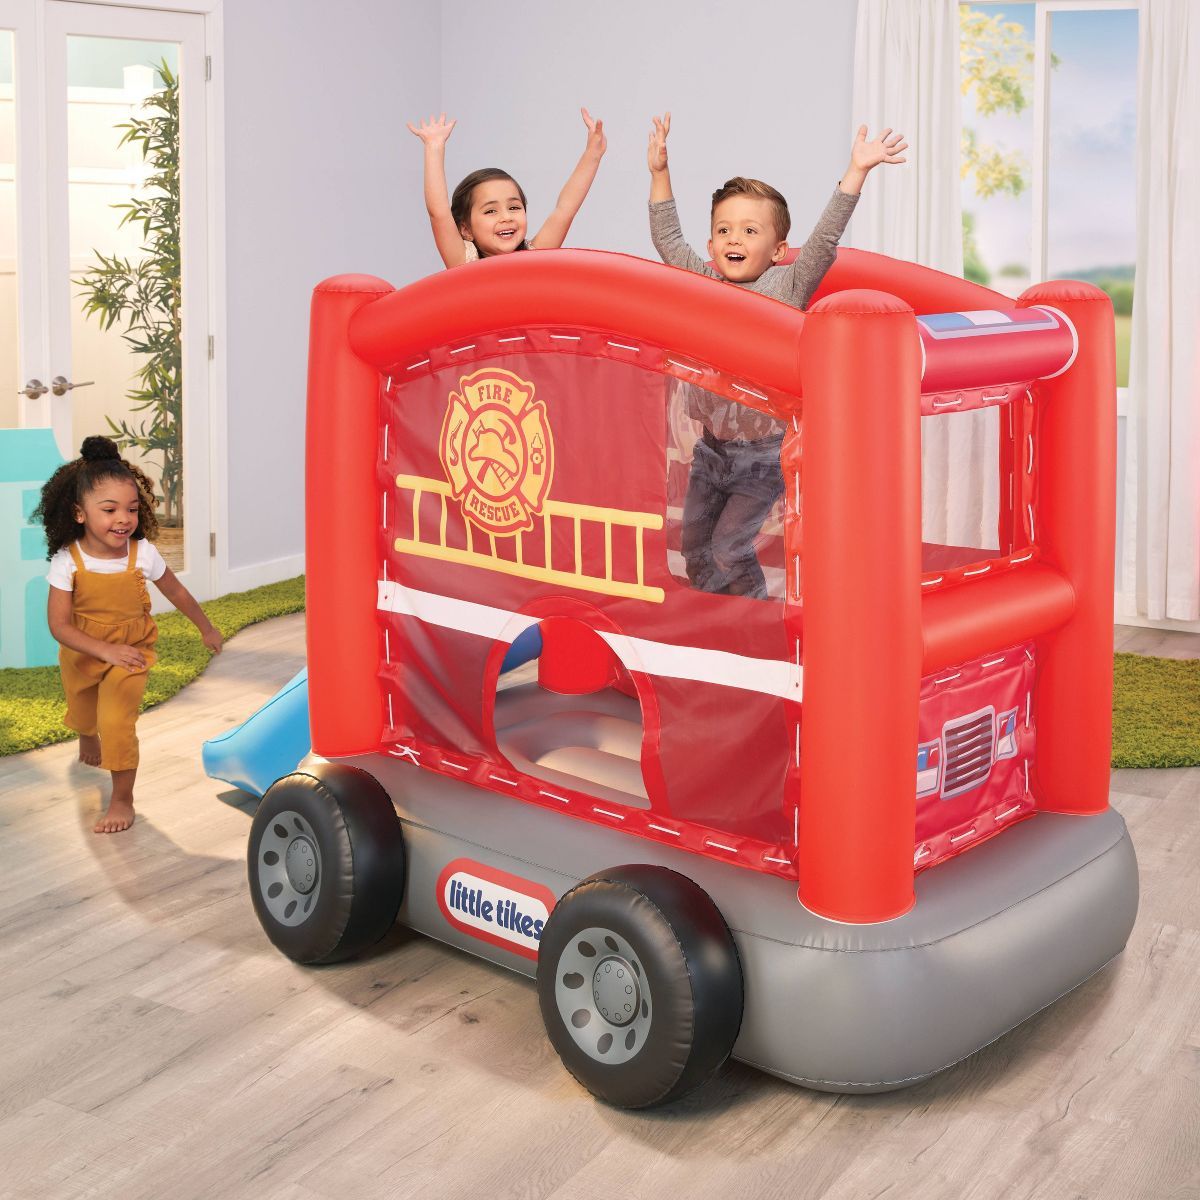 Little Tikes Inflatable Fire Truck Bounce | Target